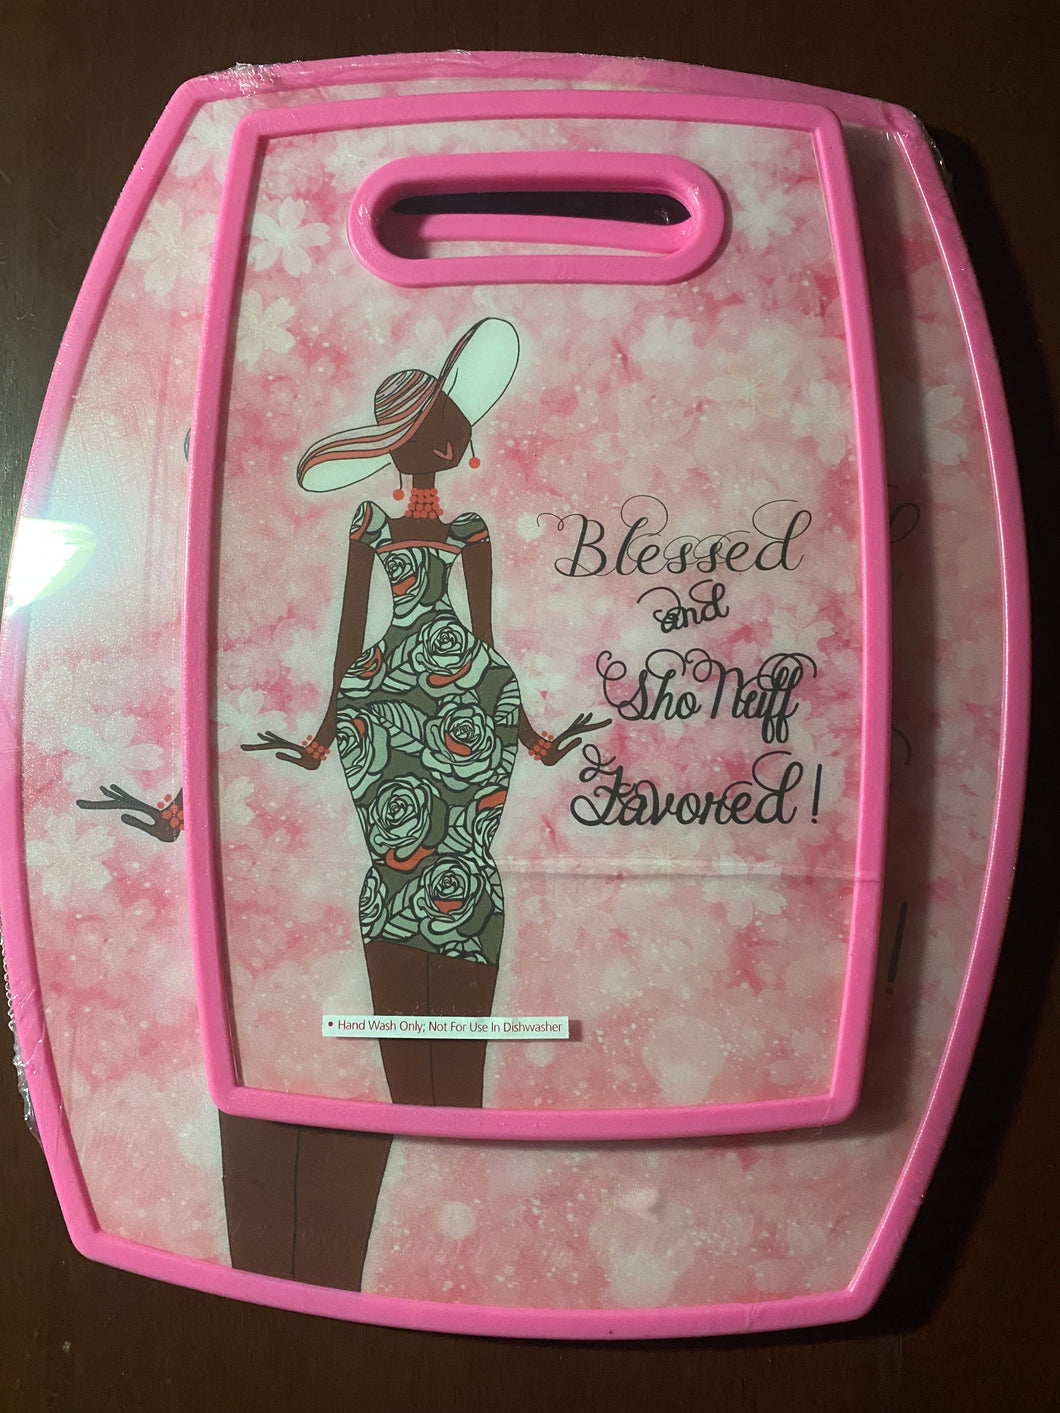 NEW!!! Blessed and Sho nuff Favored Cutting Board